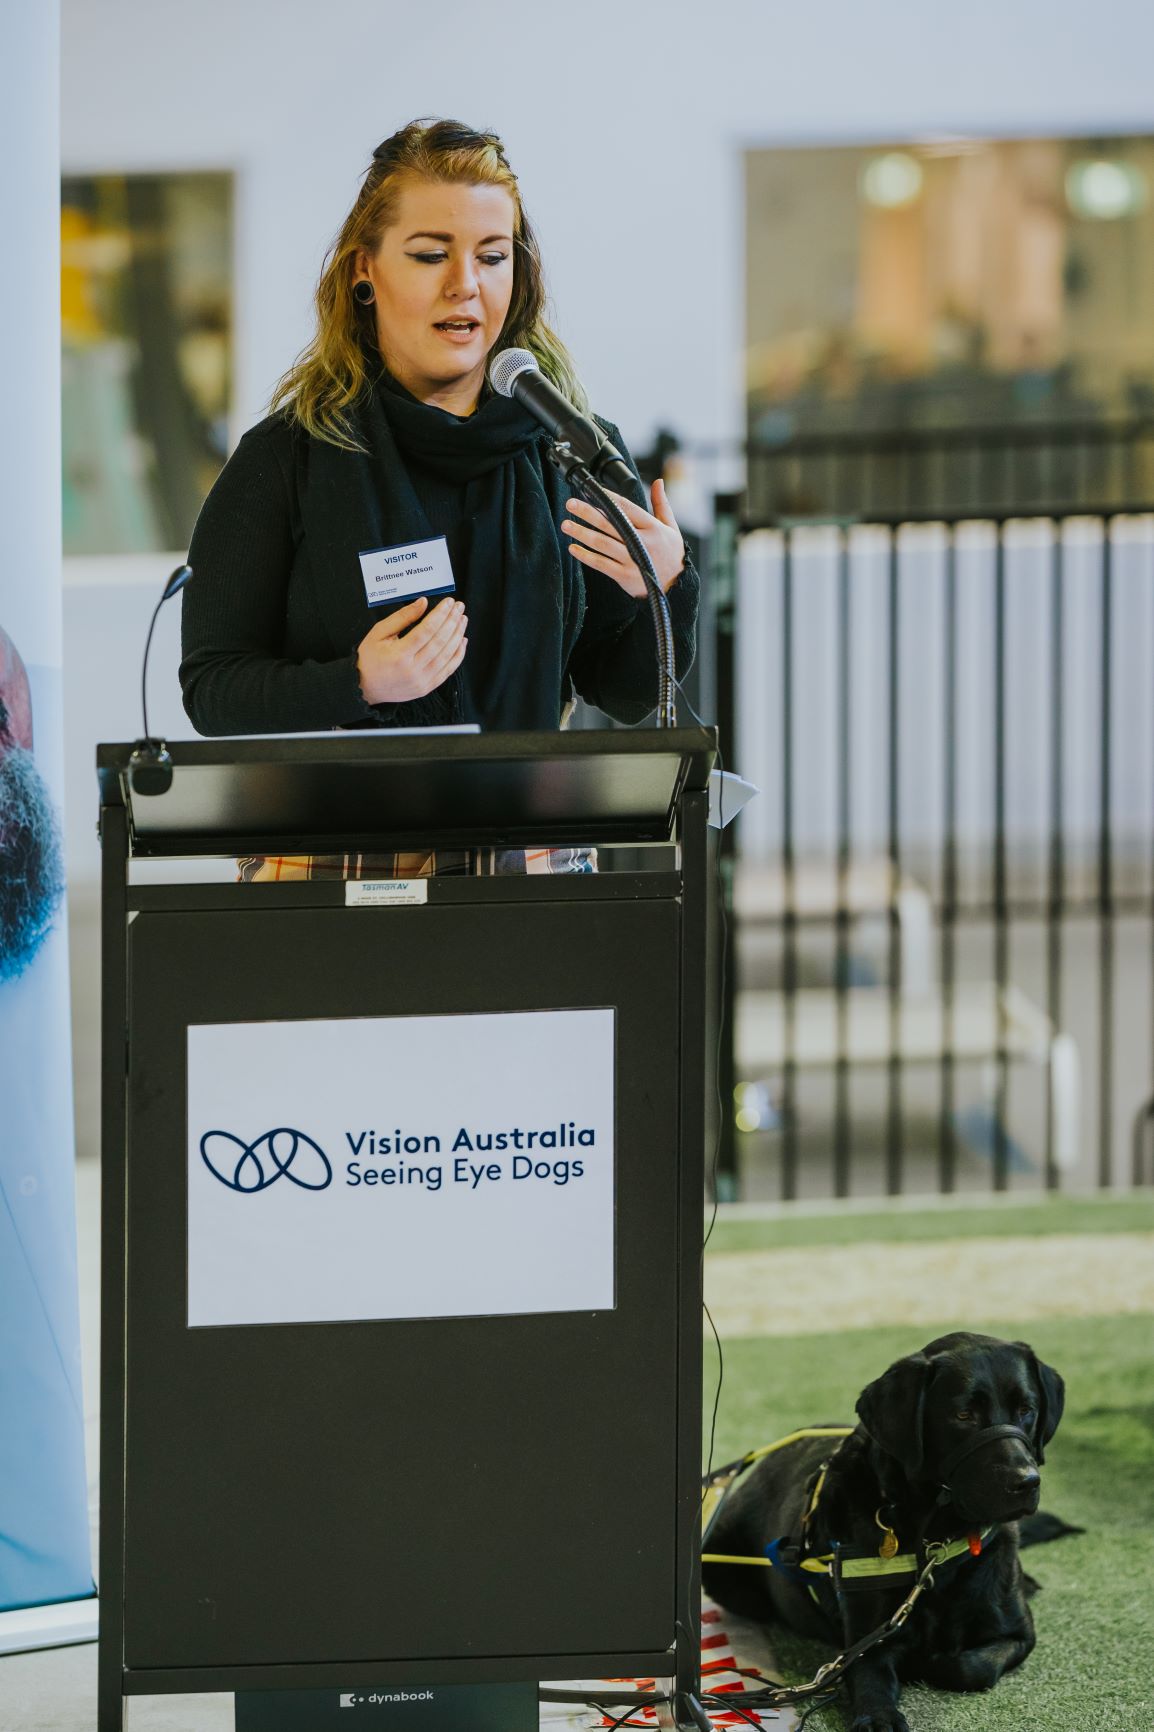 Client Britnee speaking at a lectern during the ceremony with her Seeing Eye Dog Kuma by her side.